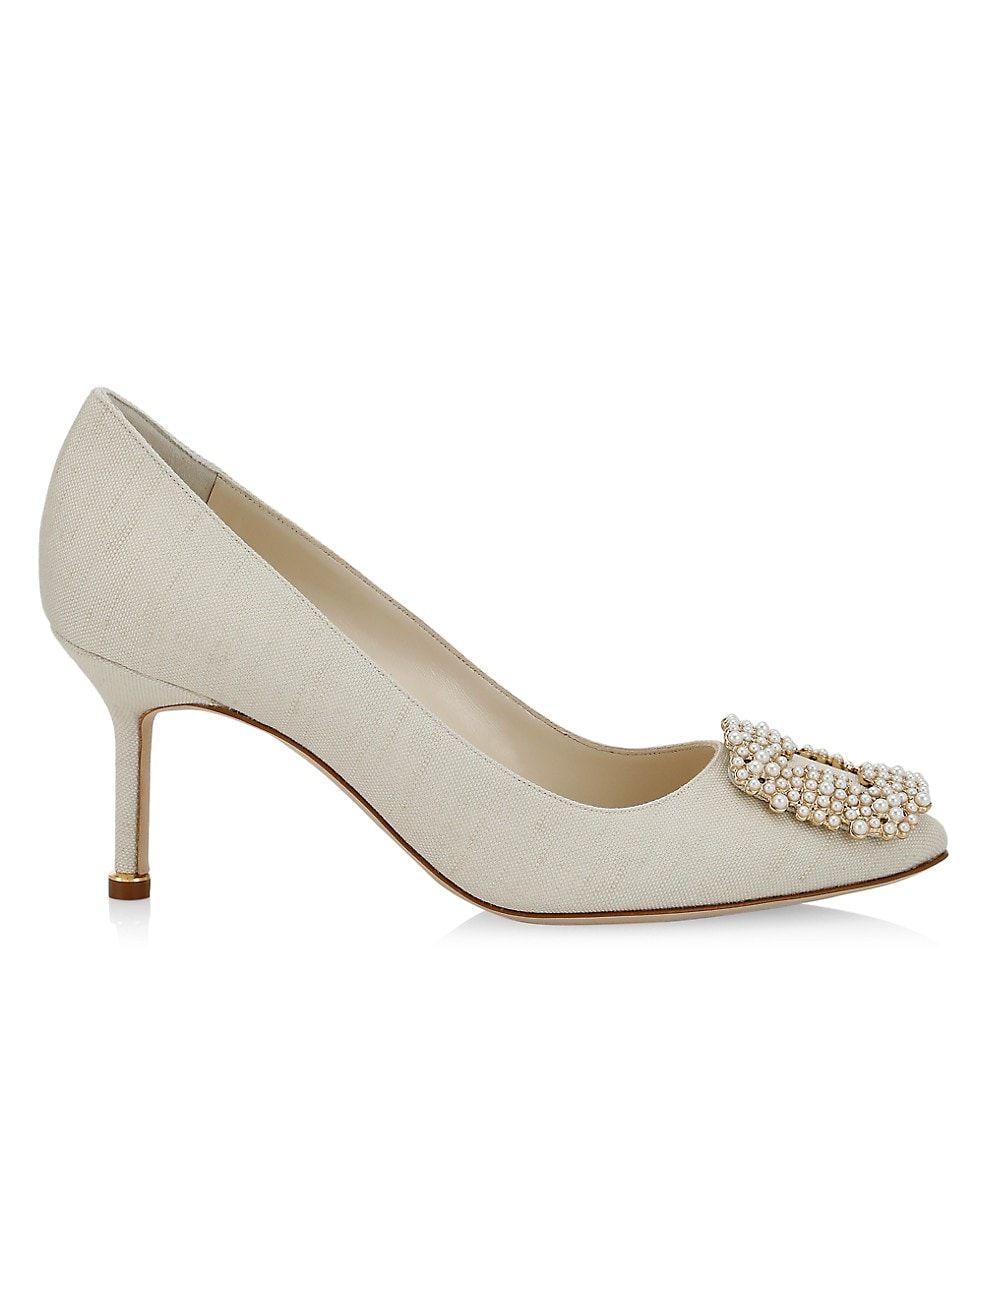 Real Leather Ivory Peep Toe Court Shoes Wedding Special Occasion